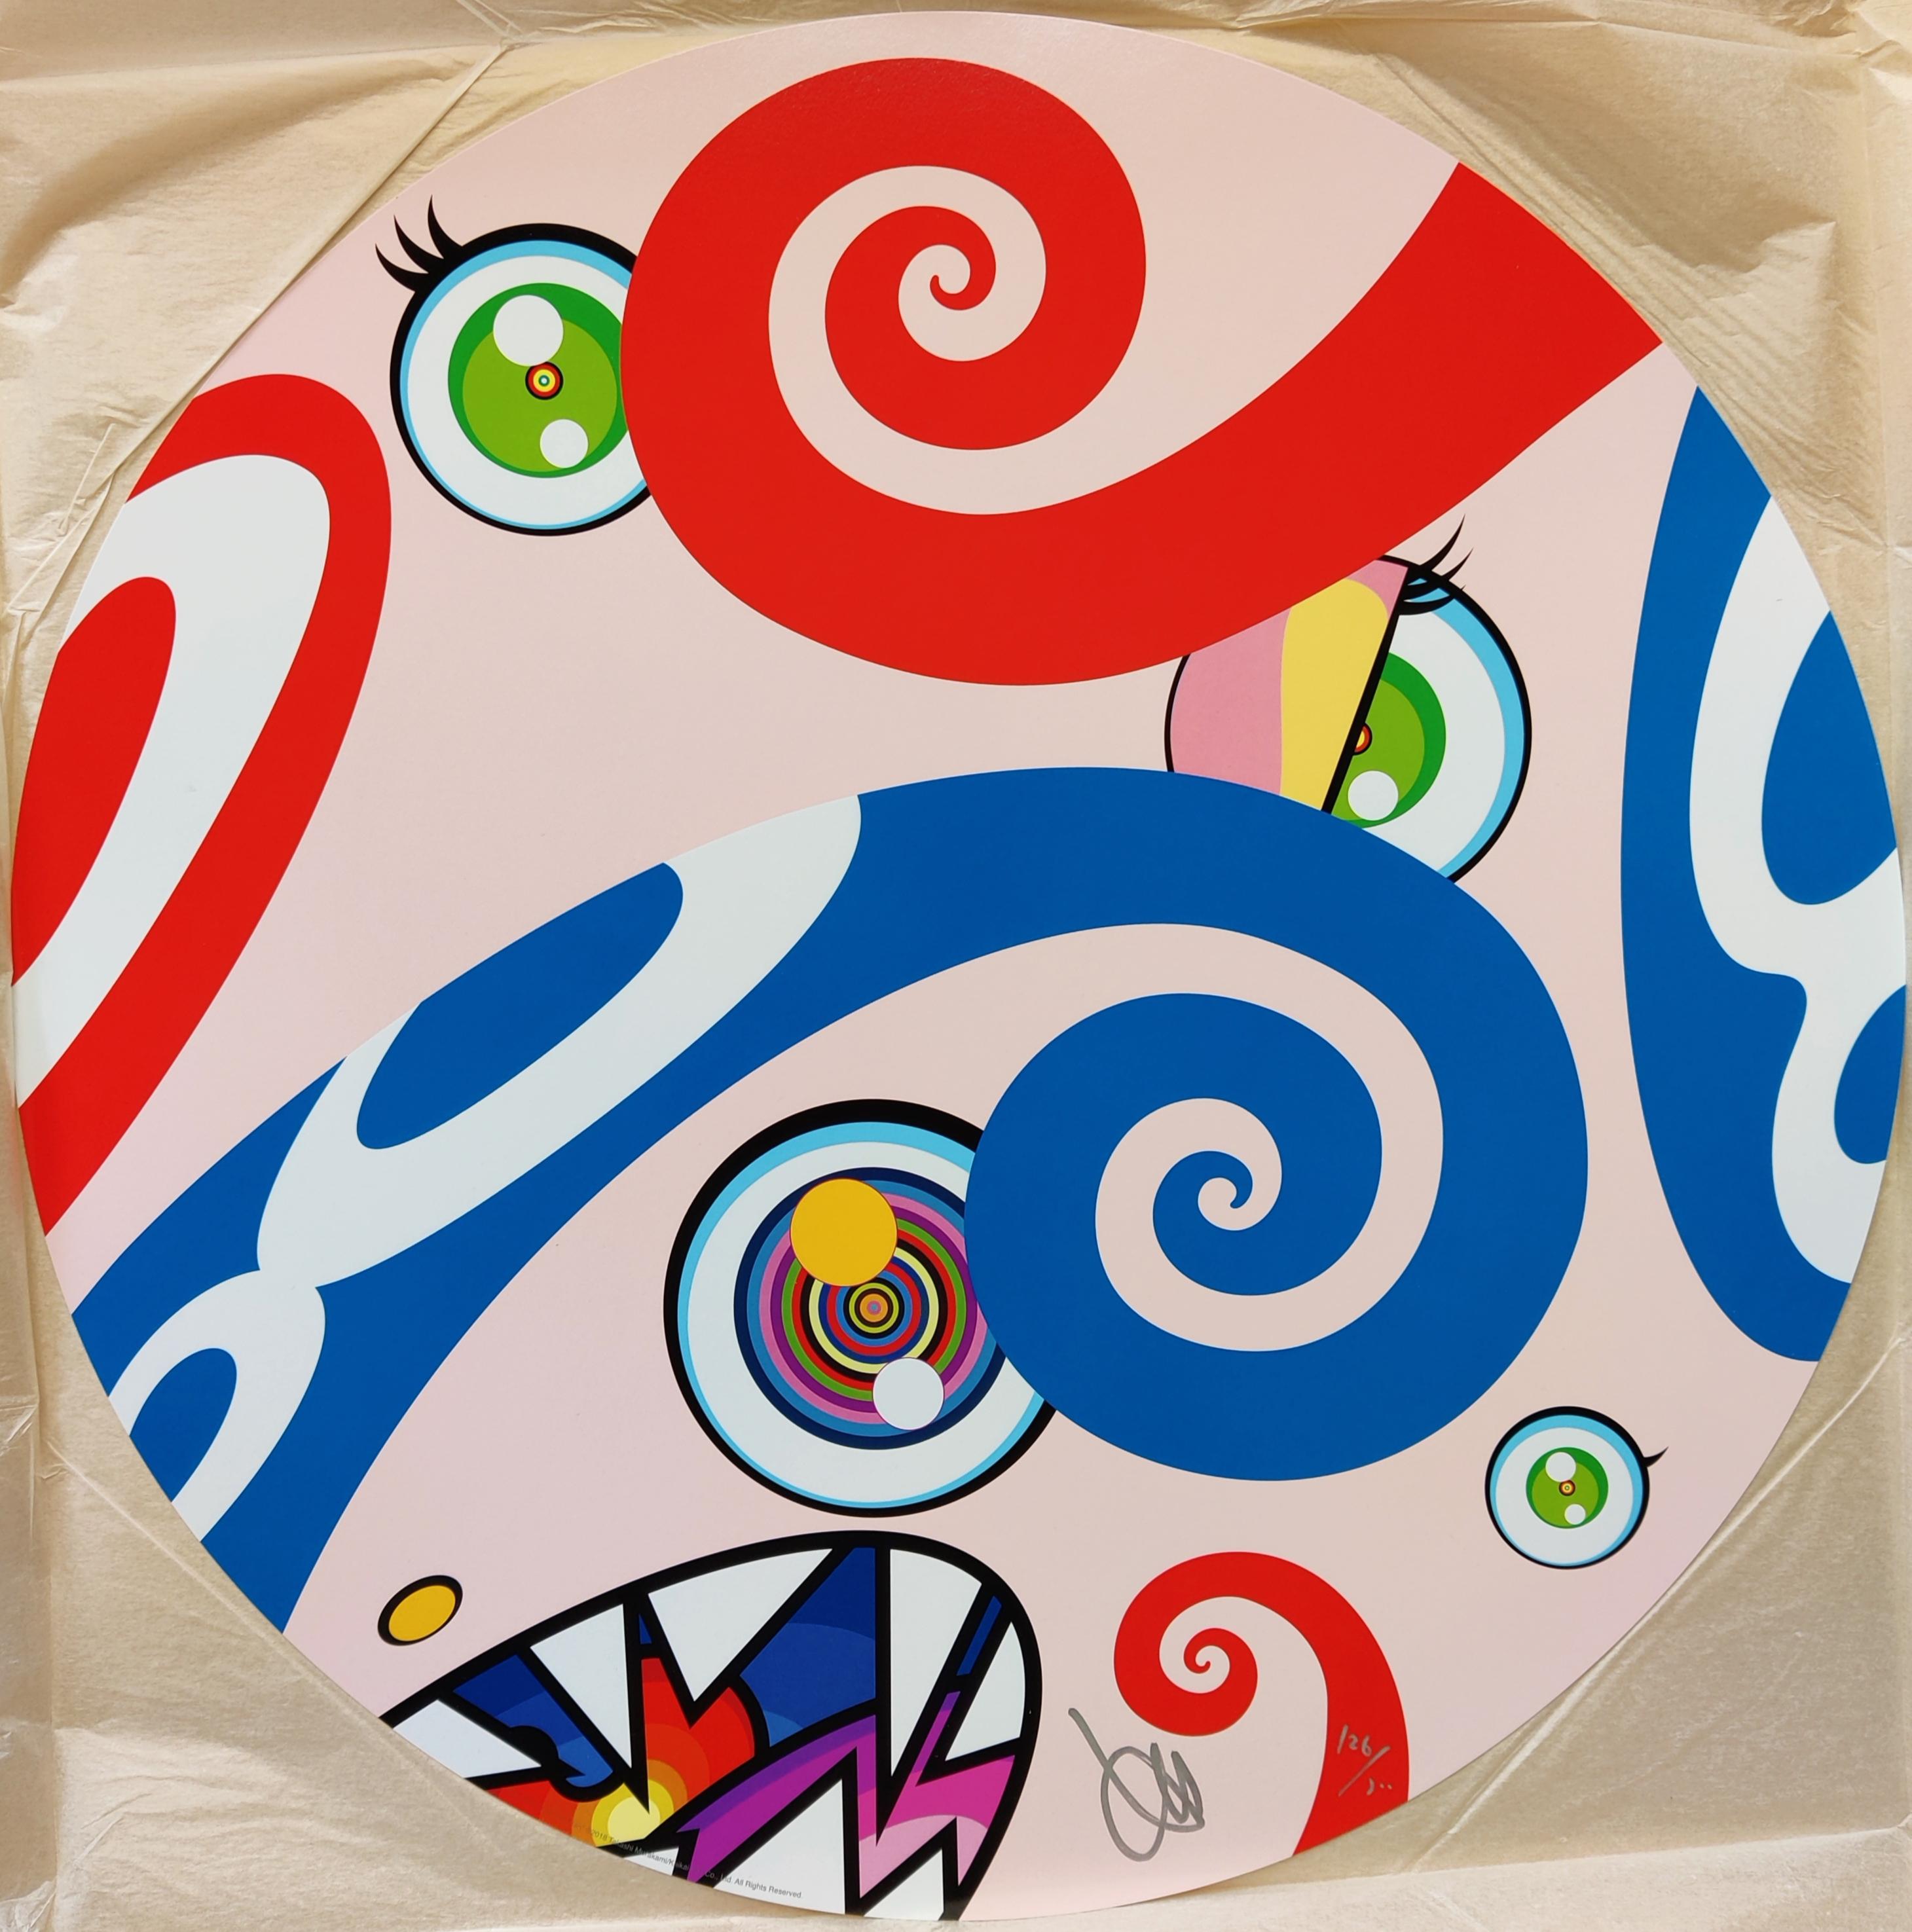 Takashi Murakami
We are the Square Jocular Clan (9), 2018
Offset lithograph
Edition: 126/300
Diameter: 50 cm
Hand Signed & Numbered by Takashi Murakami
The artwork is in excellent condition, including the original pack
Framing is an option and it